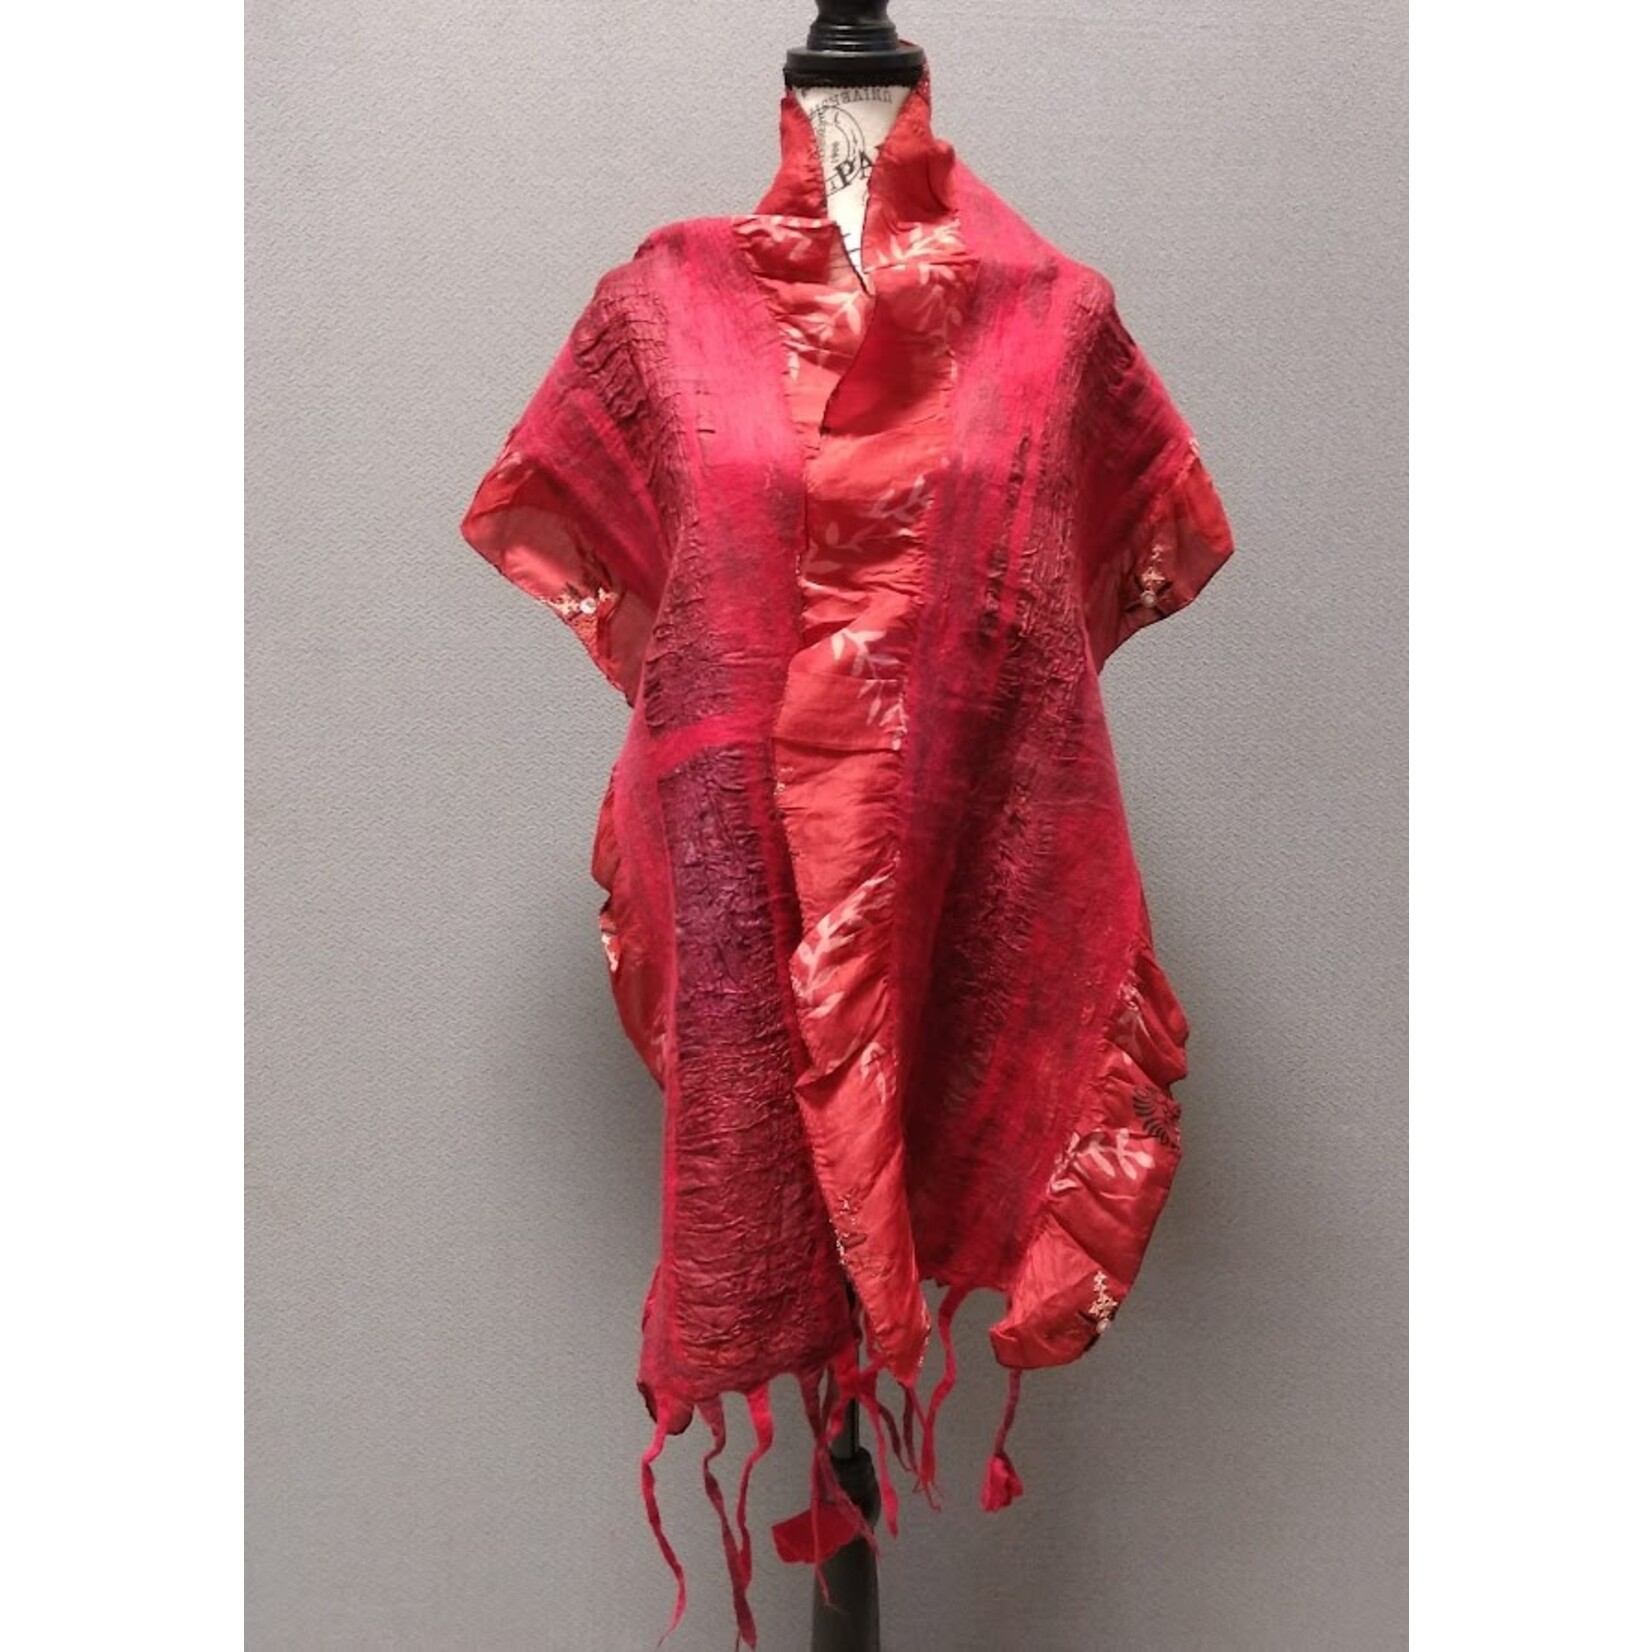 Pomegranate Moon Collage Sari Red Scarf